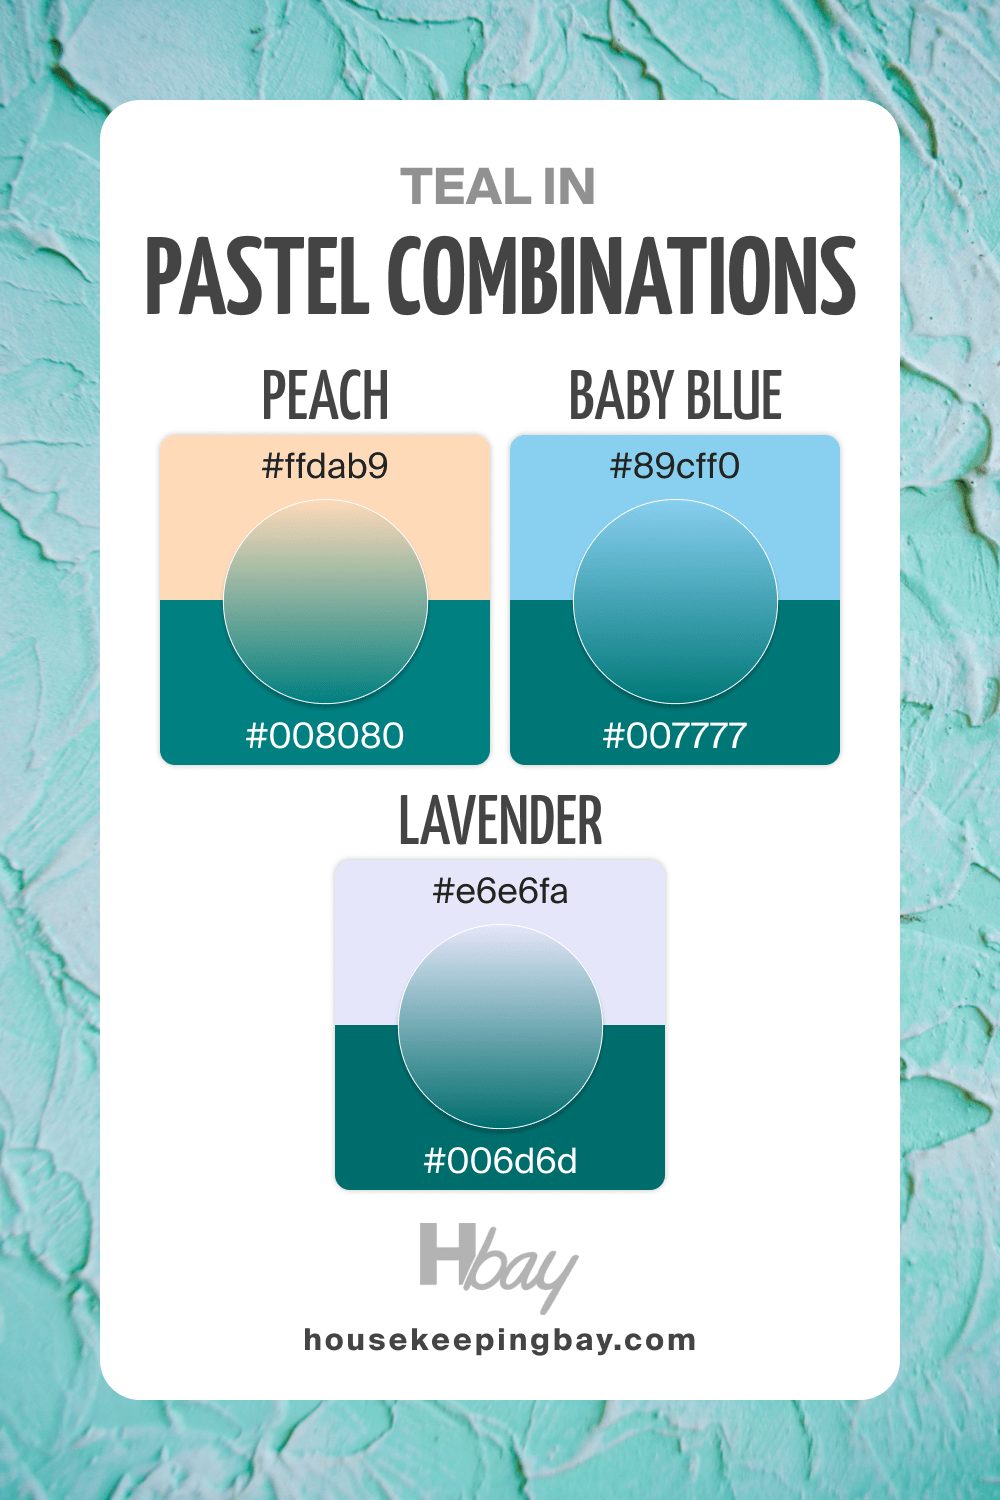 Teal in Pastel Combinations